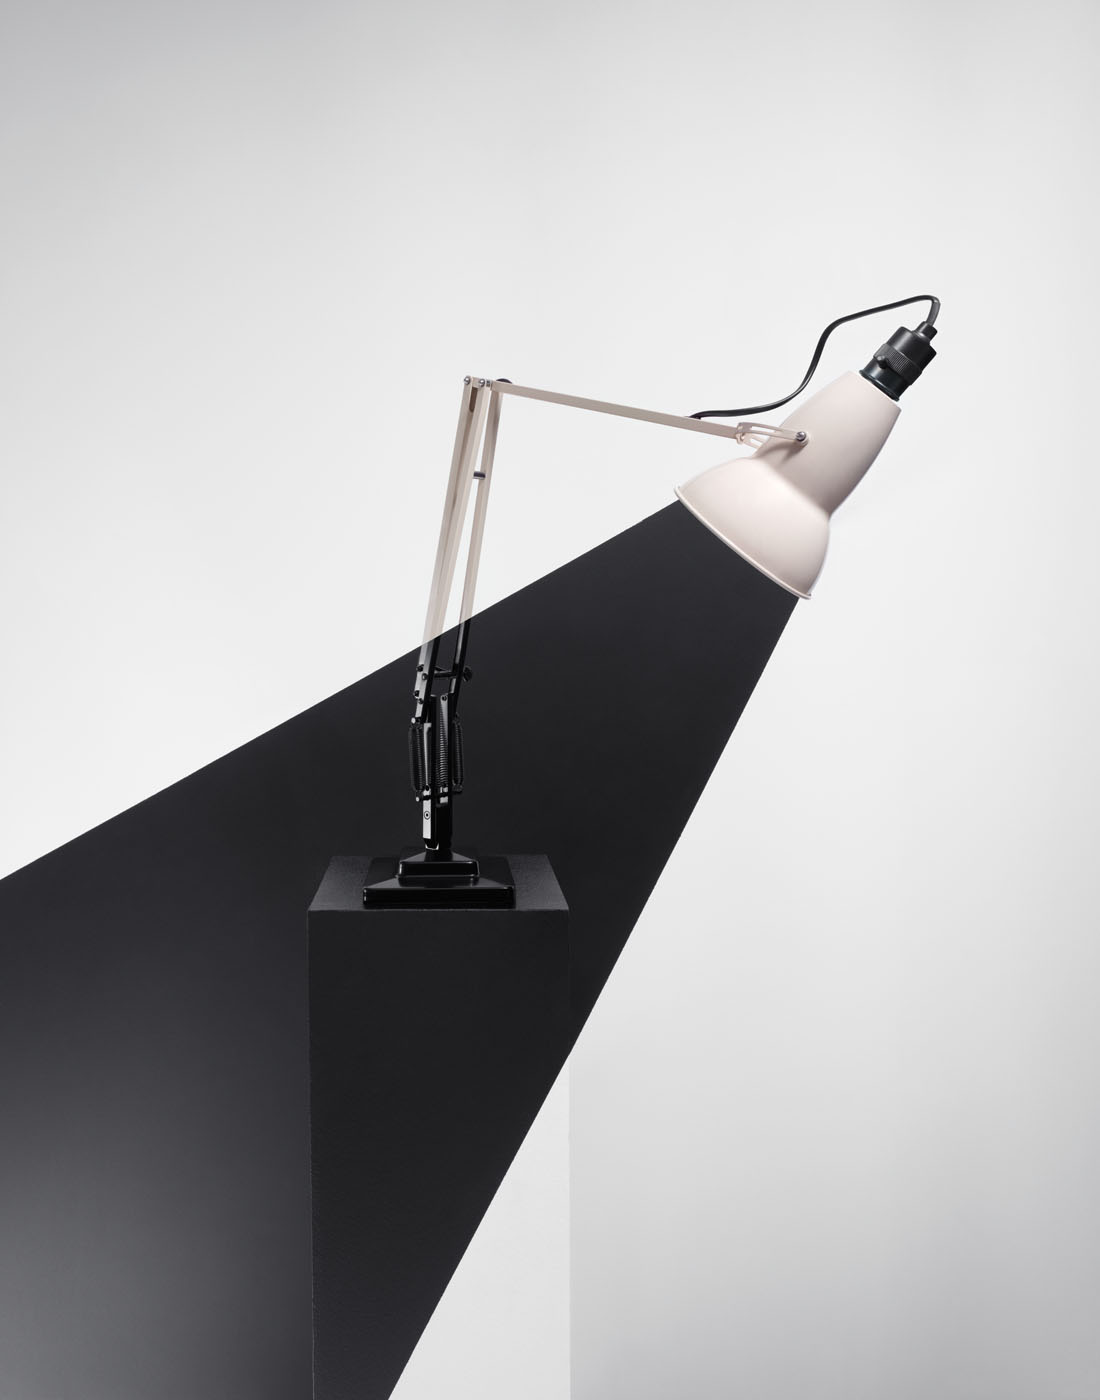 Black beam of light coming out of anglepoise lamp by Alexander Kent London based still life and product photographer.